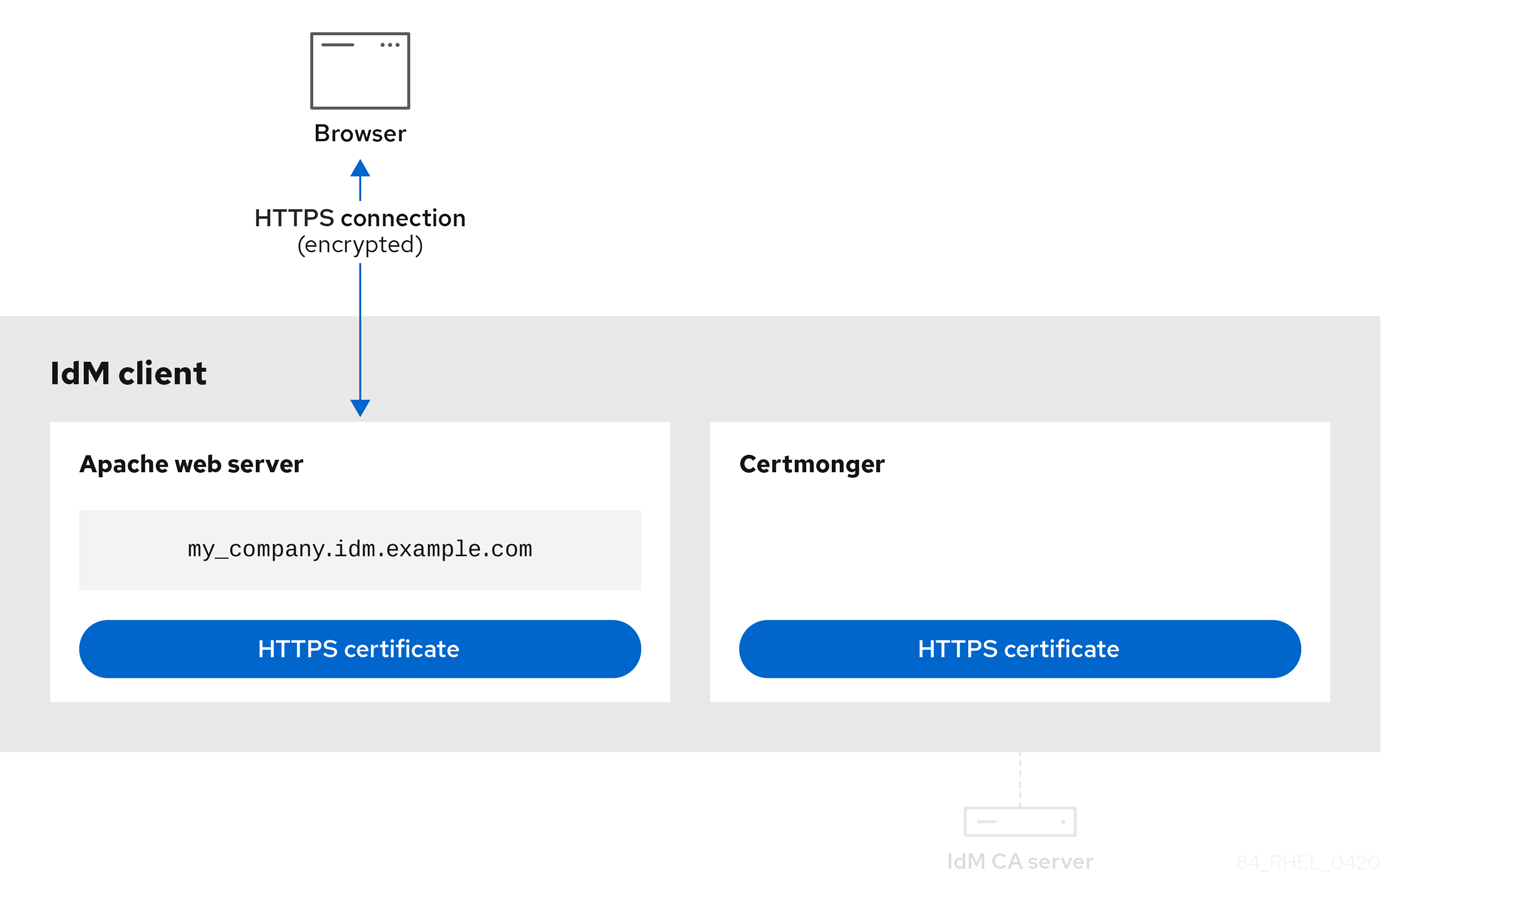 A diagram displaying an image of an HTTPS certificate assigned to the Apache web server and one assigned to the certmonger service. There are arrows between the browser and the Apache webserver showing that the connection is now an encrypted HTTPS connection. The connection between the certmonger service and the IdM CA server is inactive.